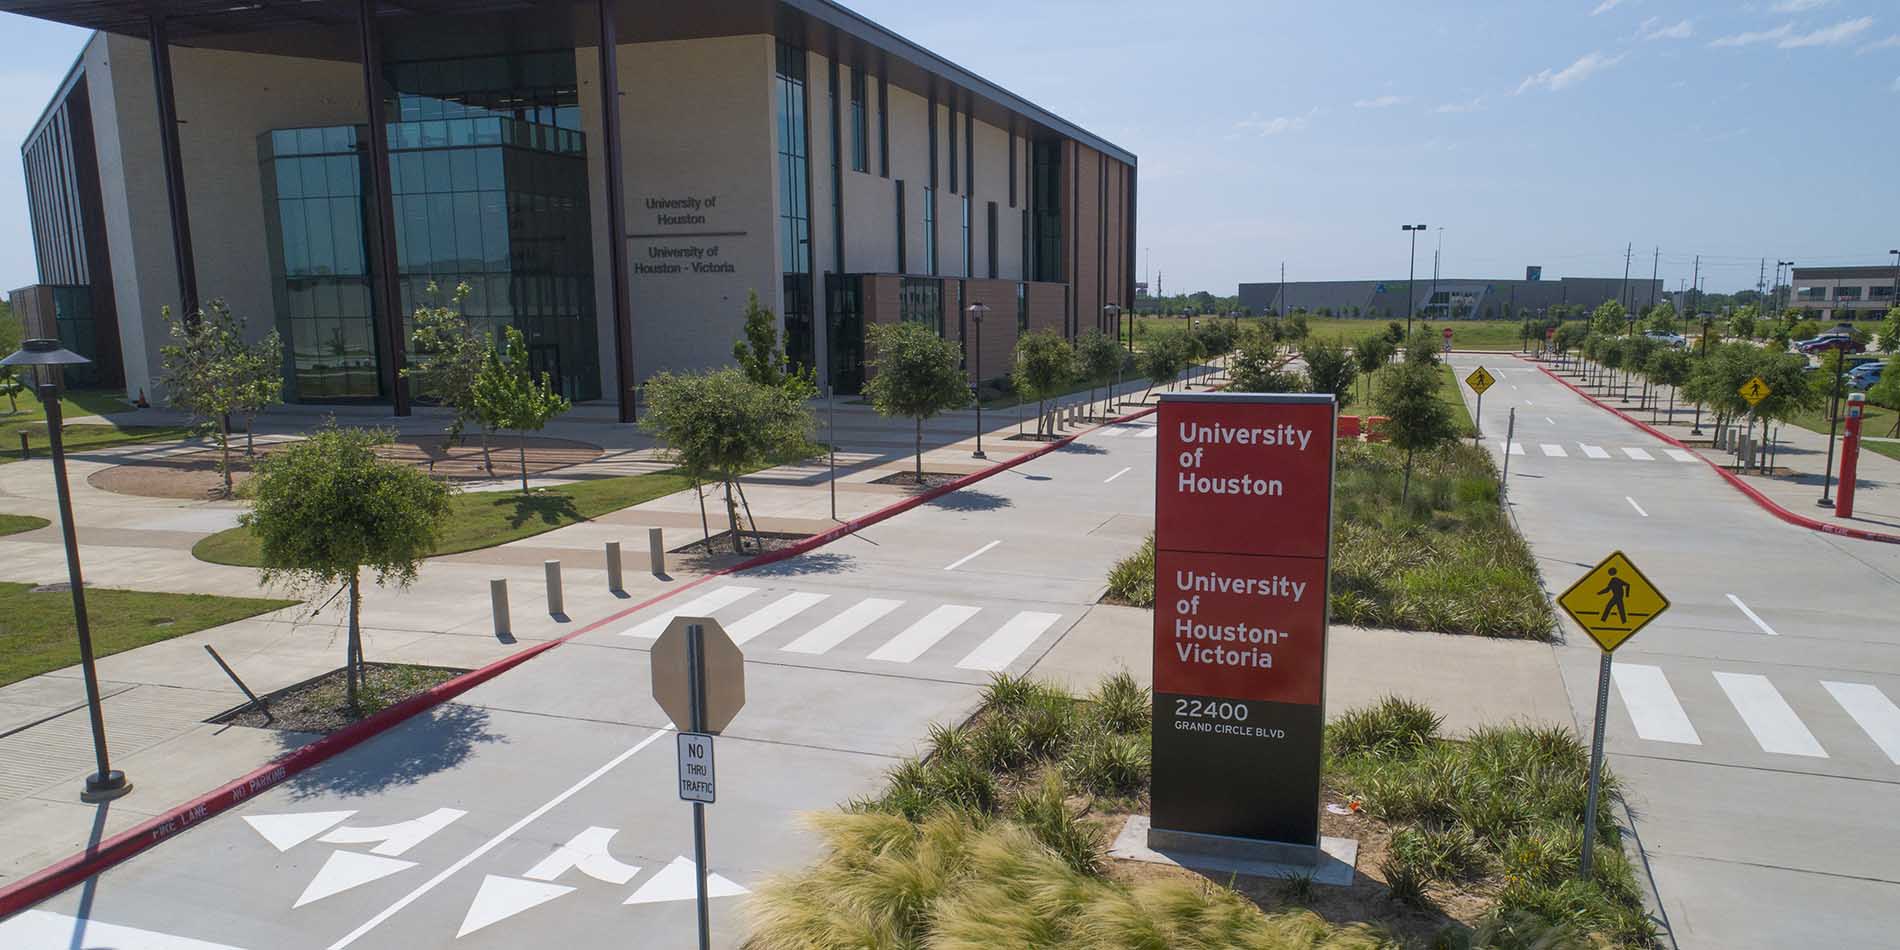 Front entrance of the campus. A red monument sign with "University of Houston" and "University of Houston - Victoria". Further back to the left is a tan brick and glass building.